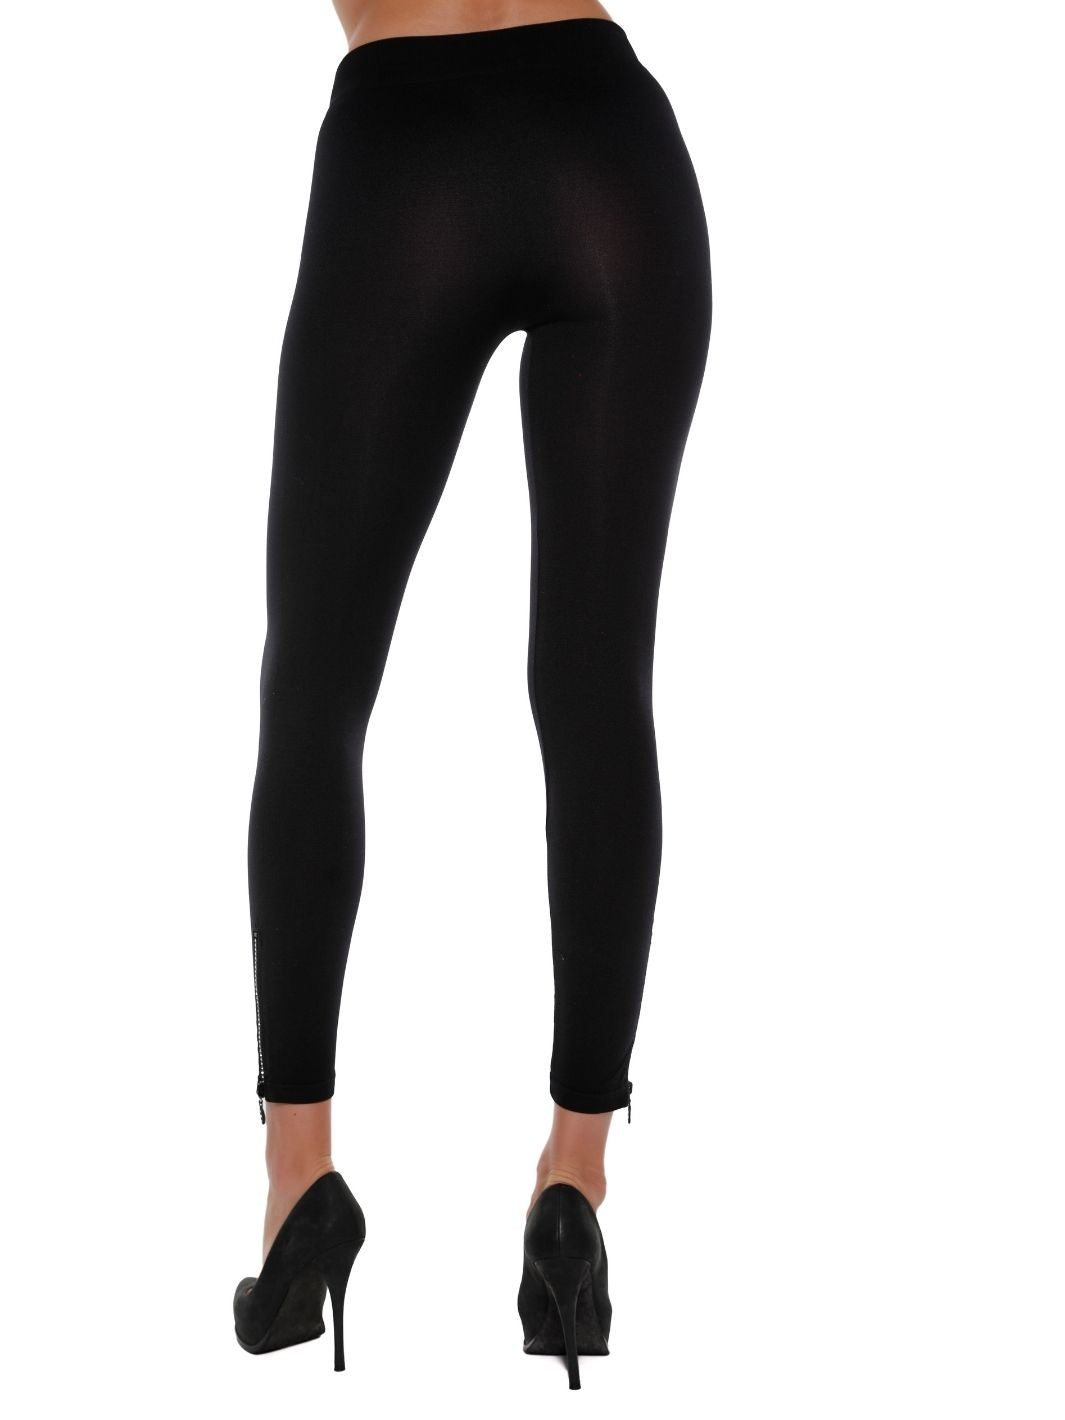 Women's Seamless Leggings with Rhinestone Zipper at the Ankle